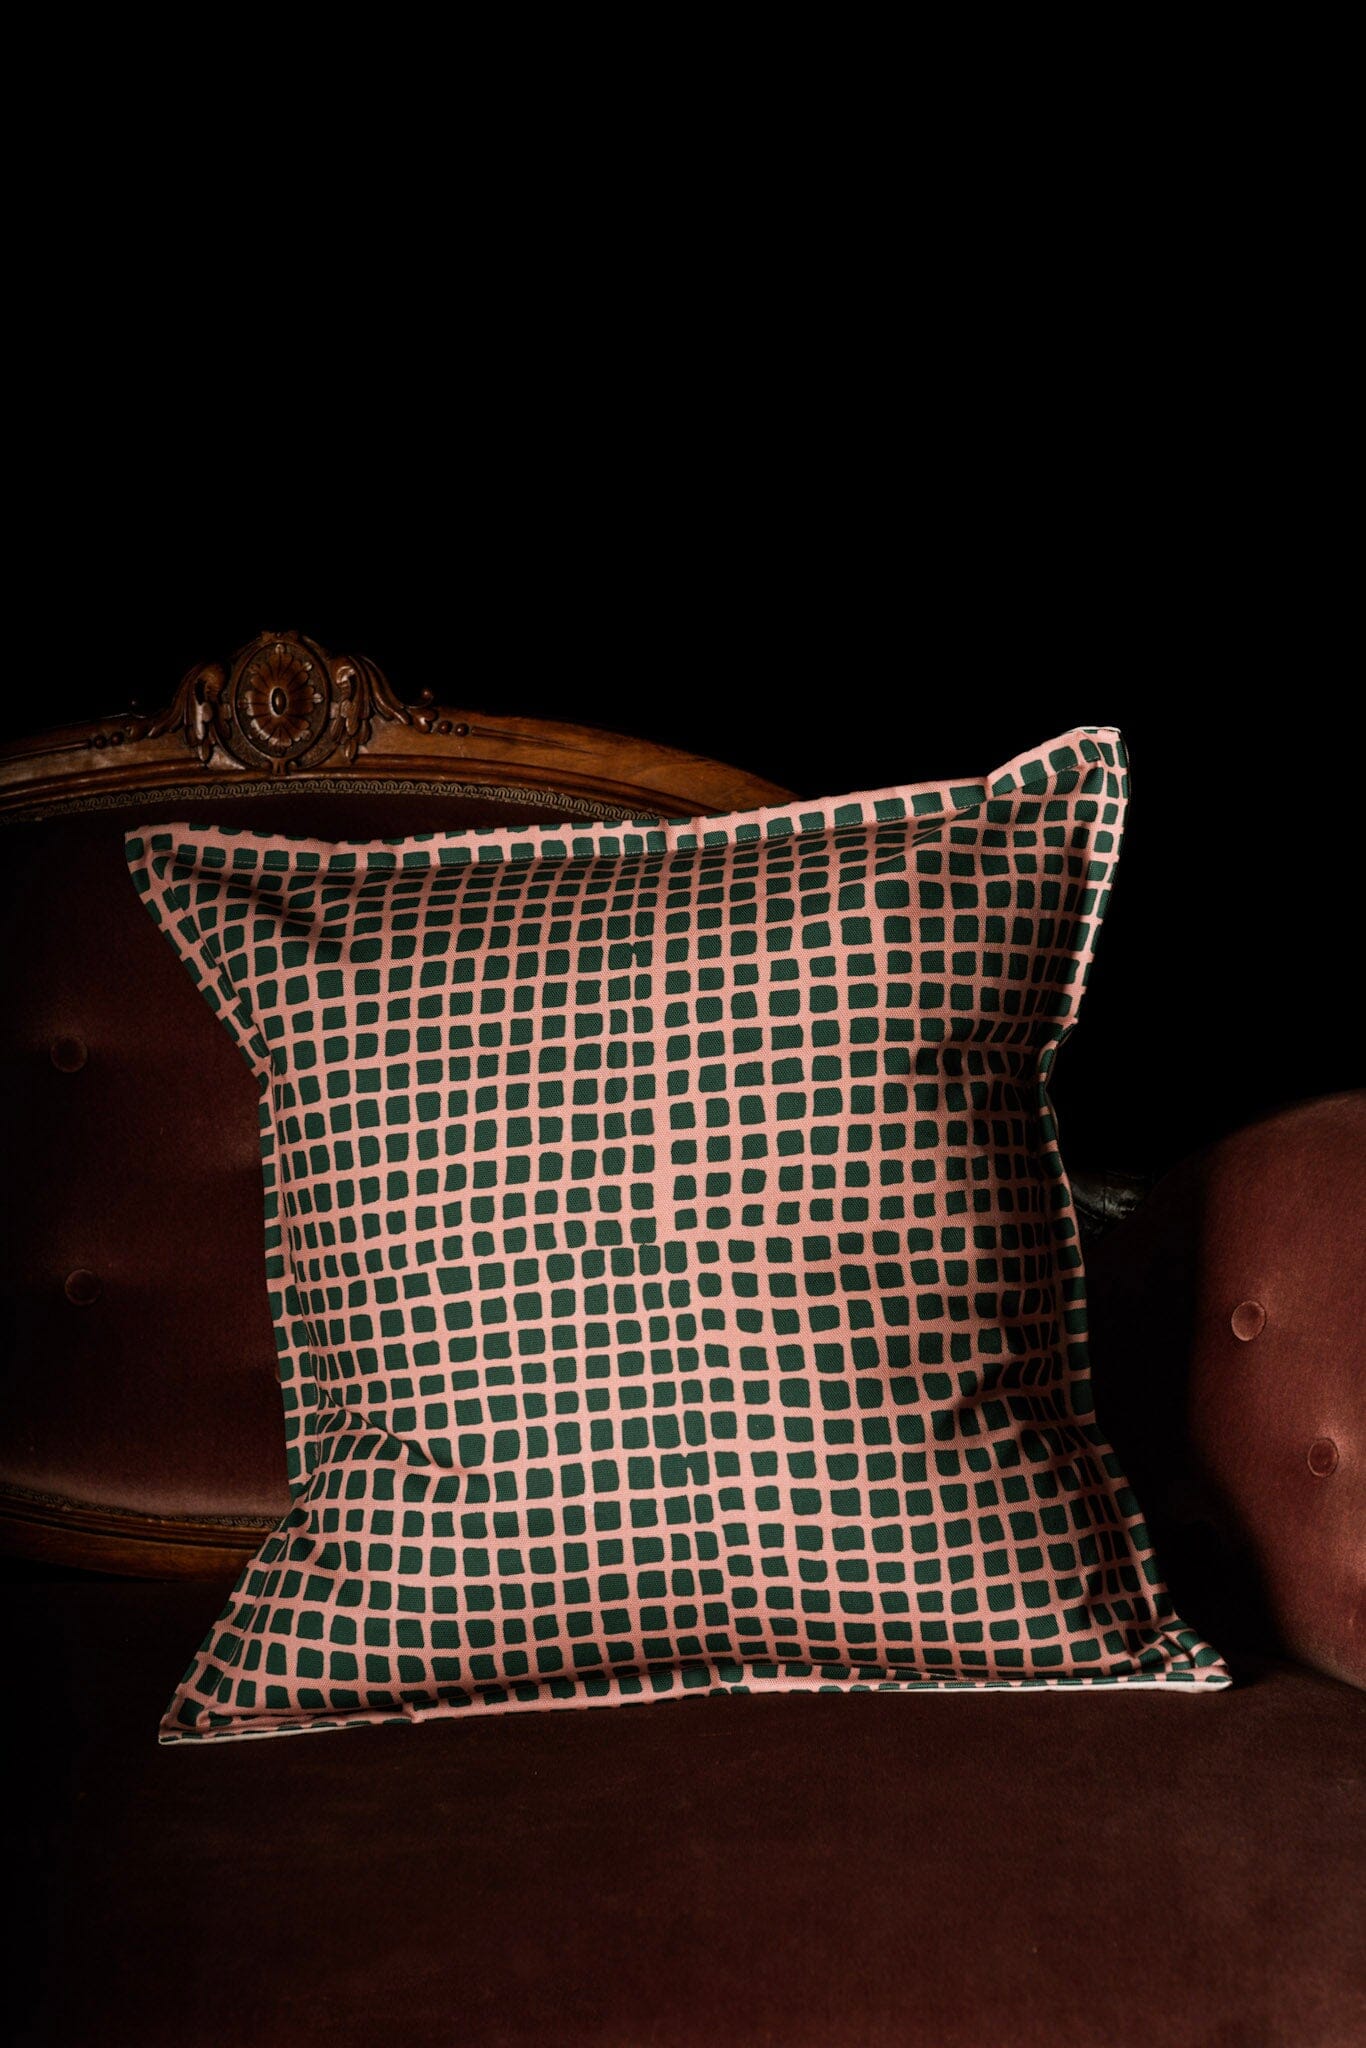 Canvas Cushion - Garden Party Cushions The Spotted Quoll 